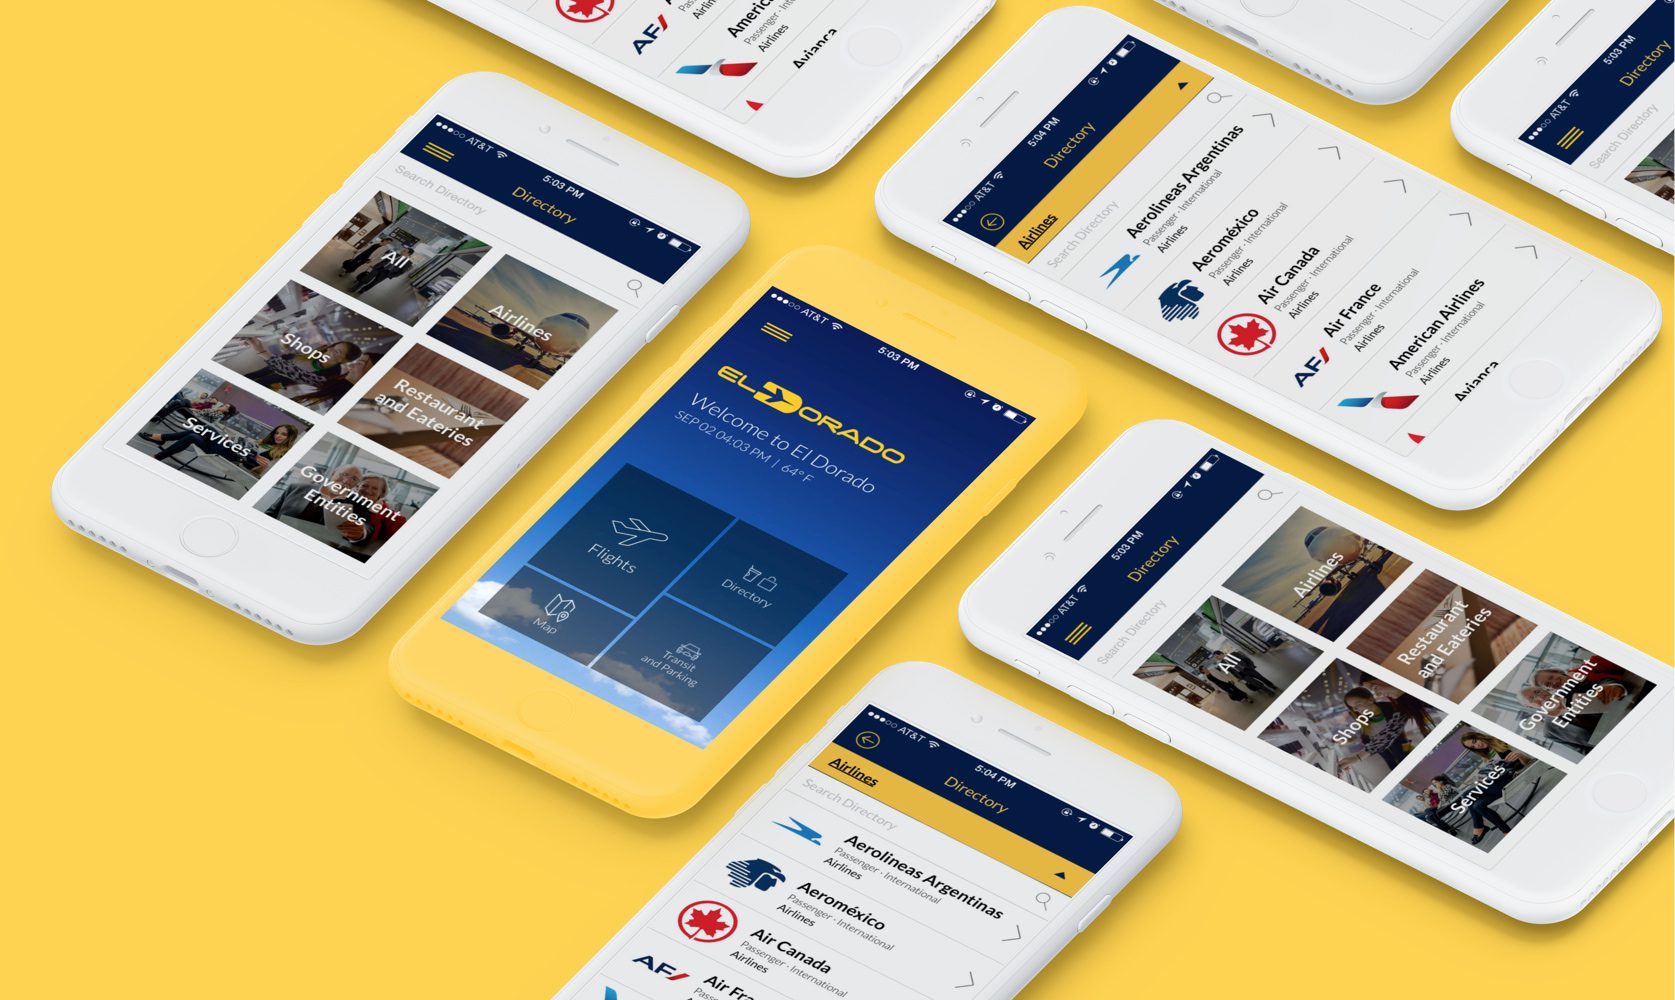 The official airline app of the El Eorado Airport in Bogotá, Colombia